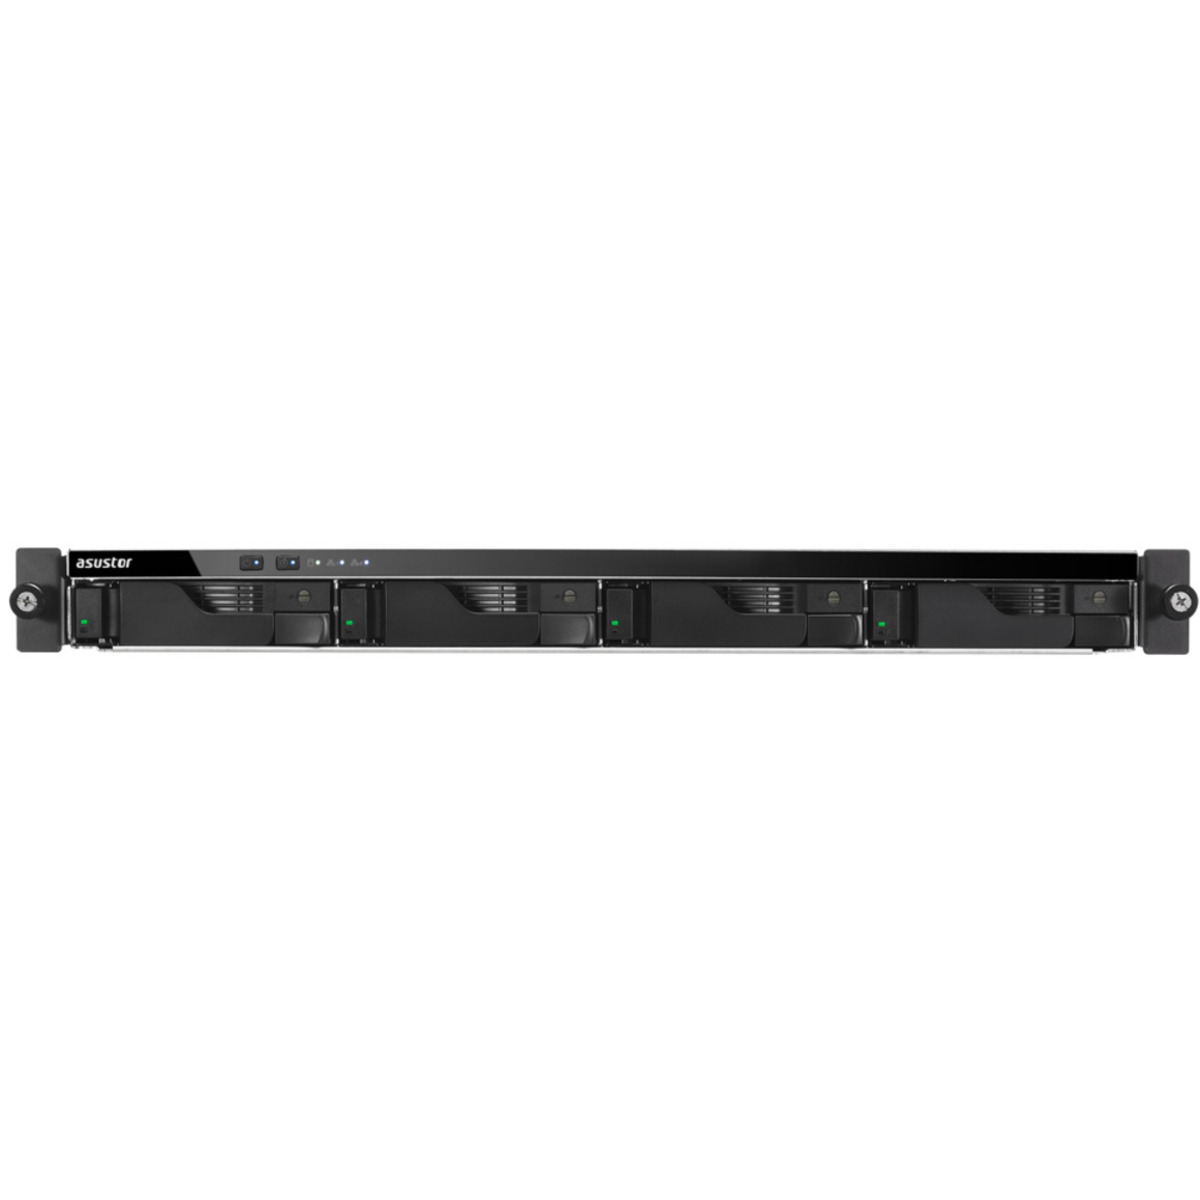 ASUSTOR LOCKERSTOR 4RD AS6504RD 8tb 4-Bay RackMount Multimedia / Power User / Business NAS - Network Attached Storage Device 4x2tb Seagate IronWolf Pro ST2000NT001 3.5 7200rpm SATA 6Gb/s HDD NAS Class Drives Installed - Burn-In Tested - FREE RAM UPGRADE LOCKERSTOR 4RD AS6504RD